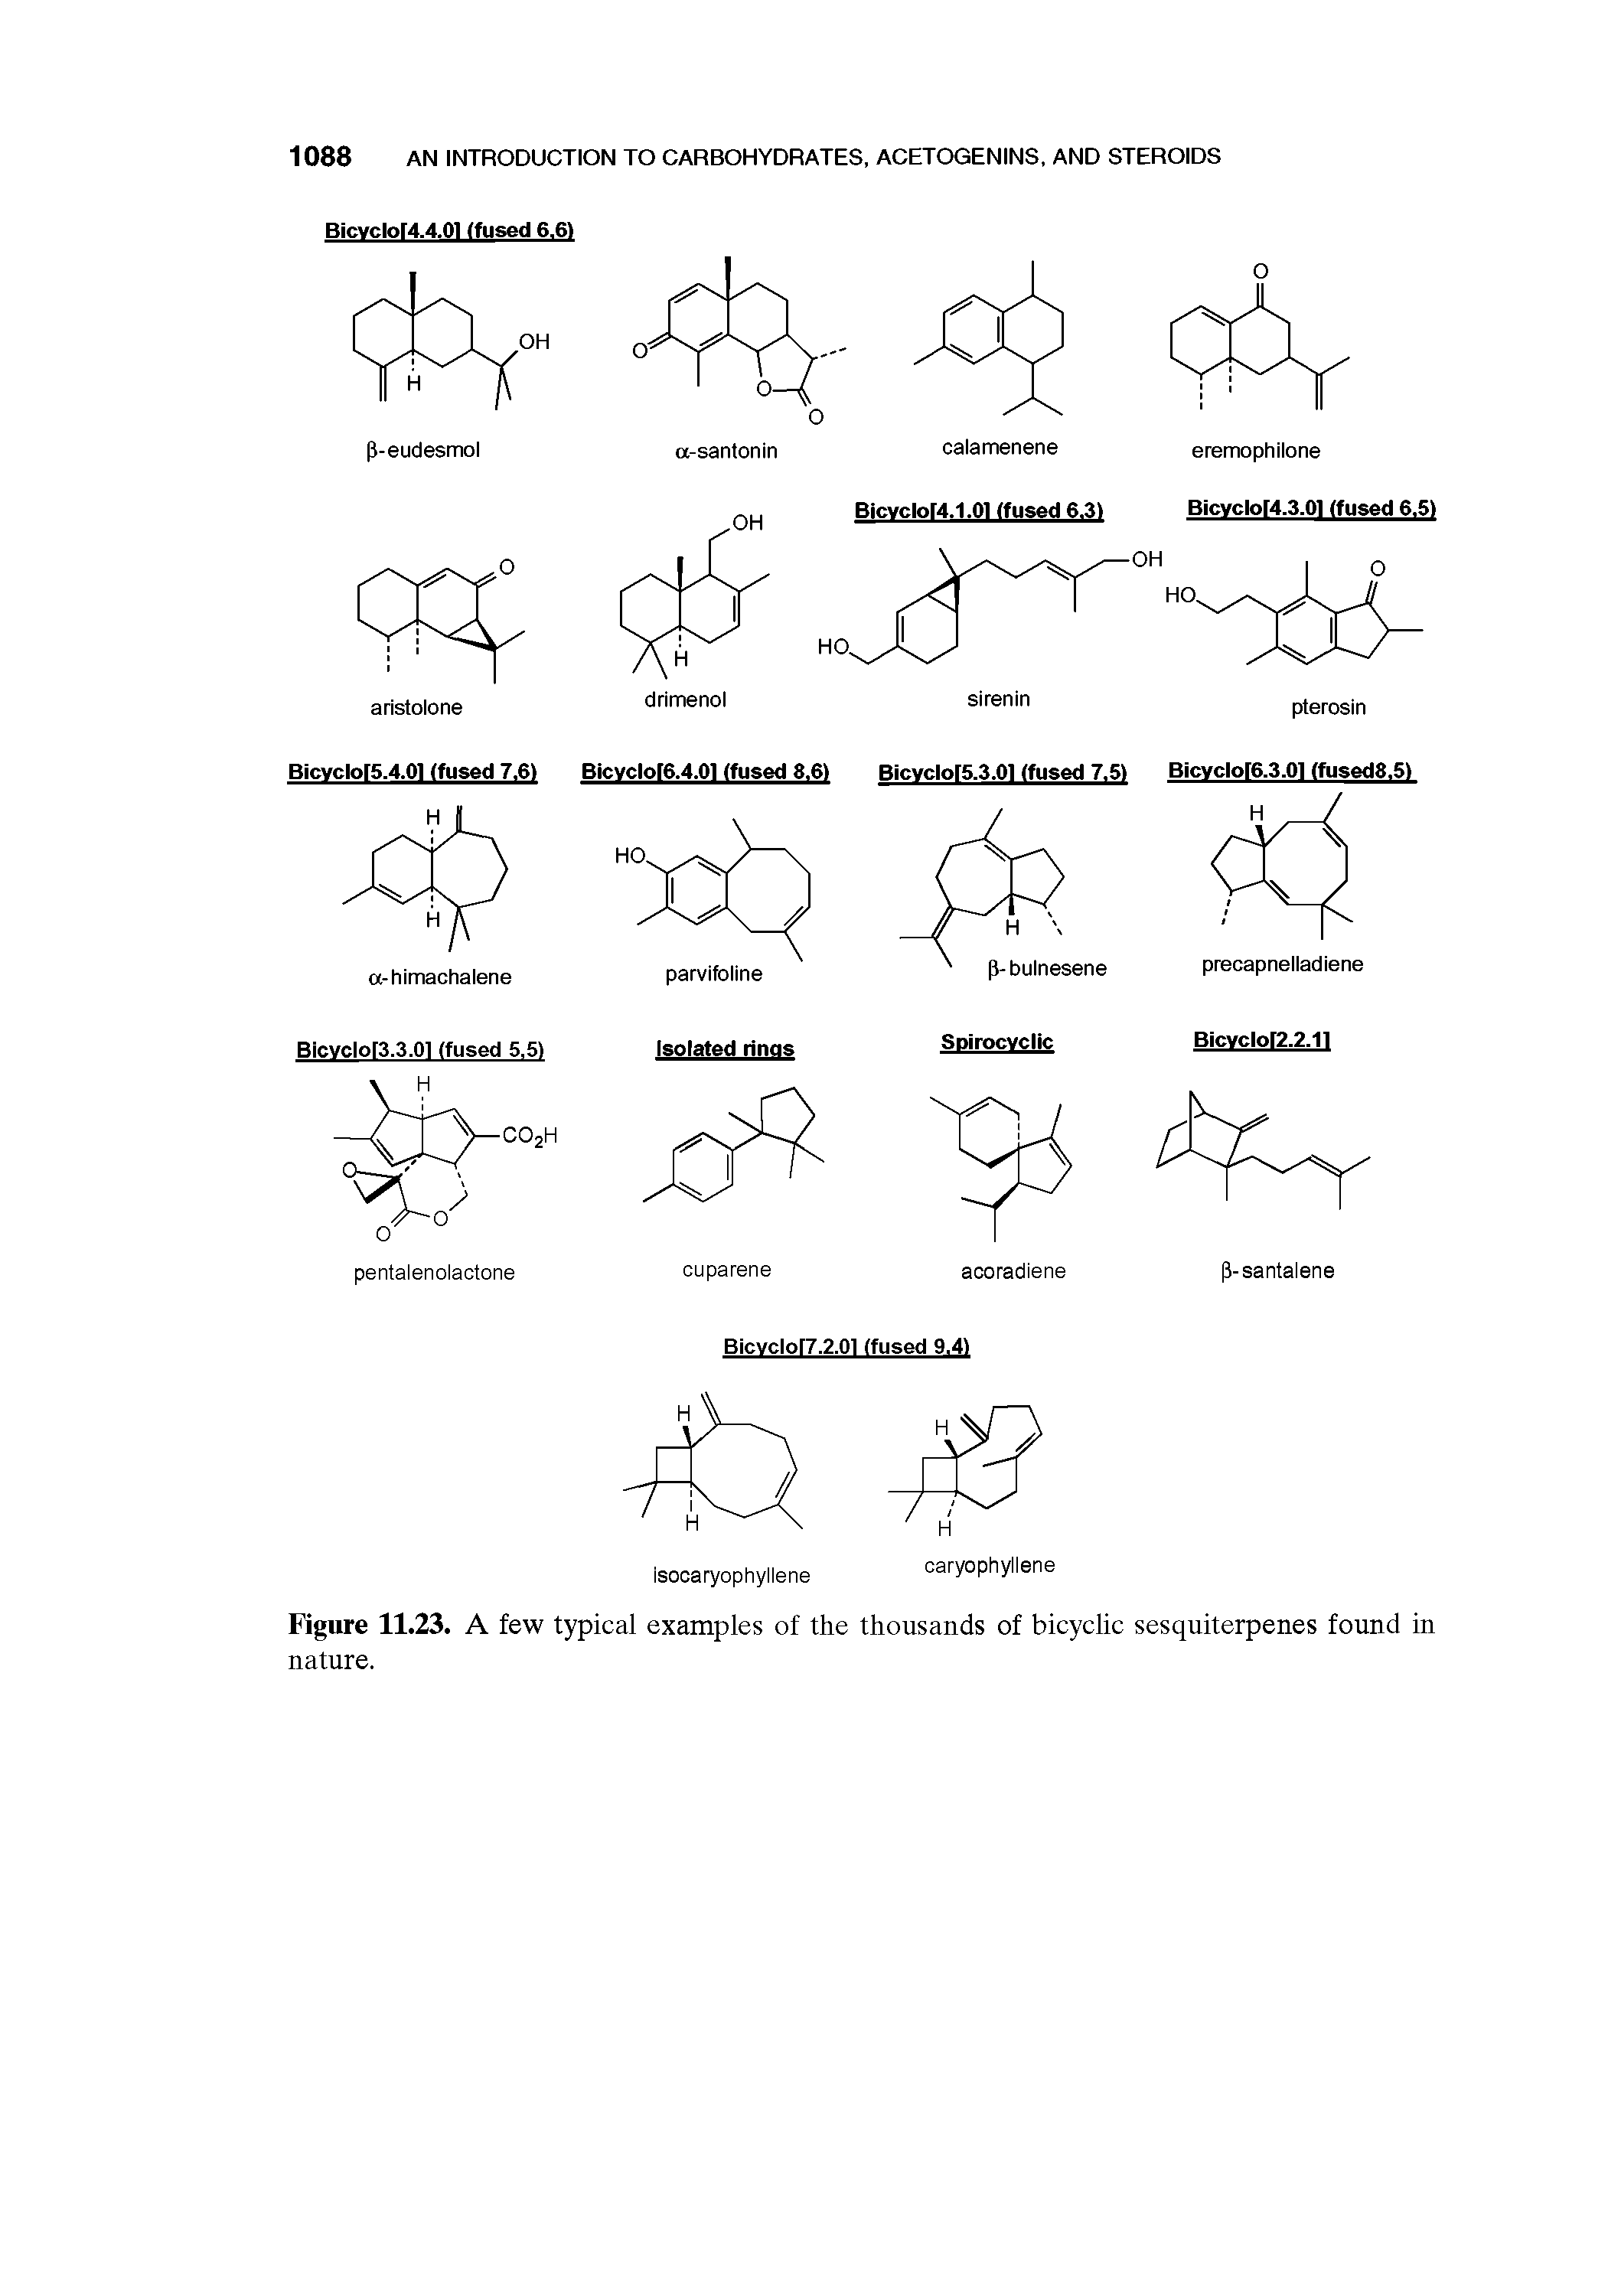 Figure 11.23. A few typical examples of the thousands of bicyclic sesquiterpenes found in nature.